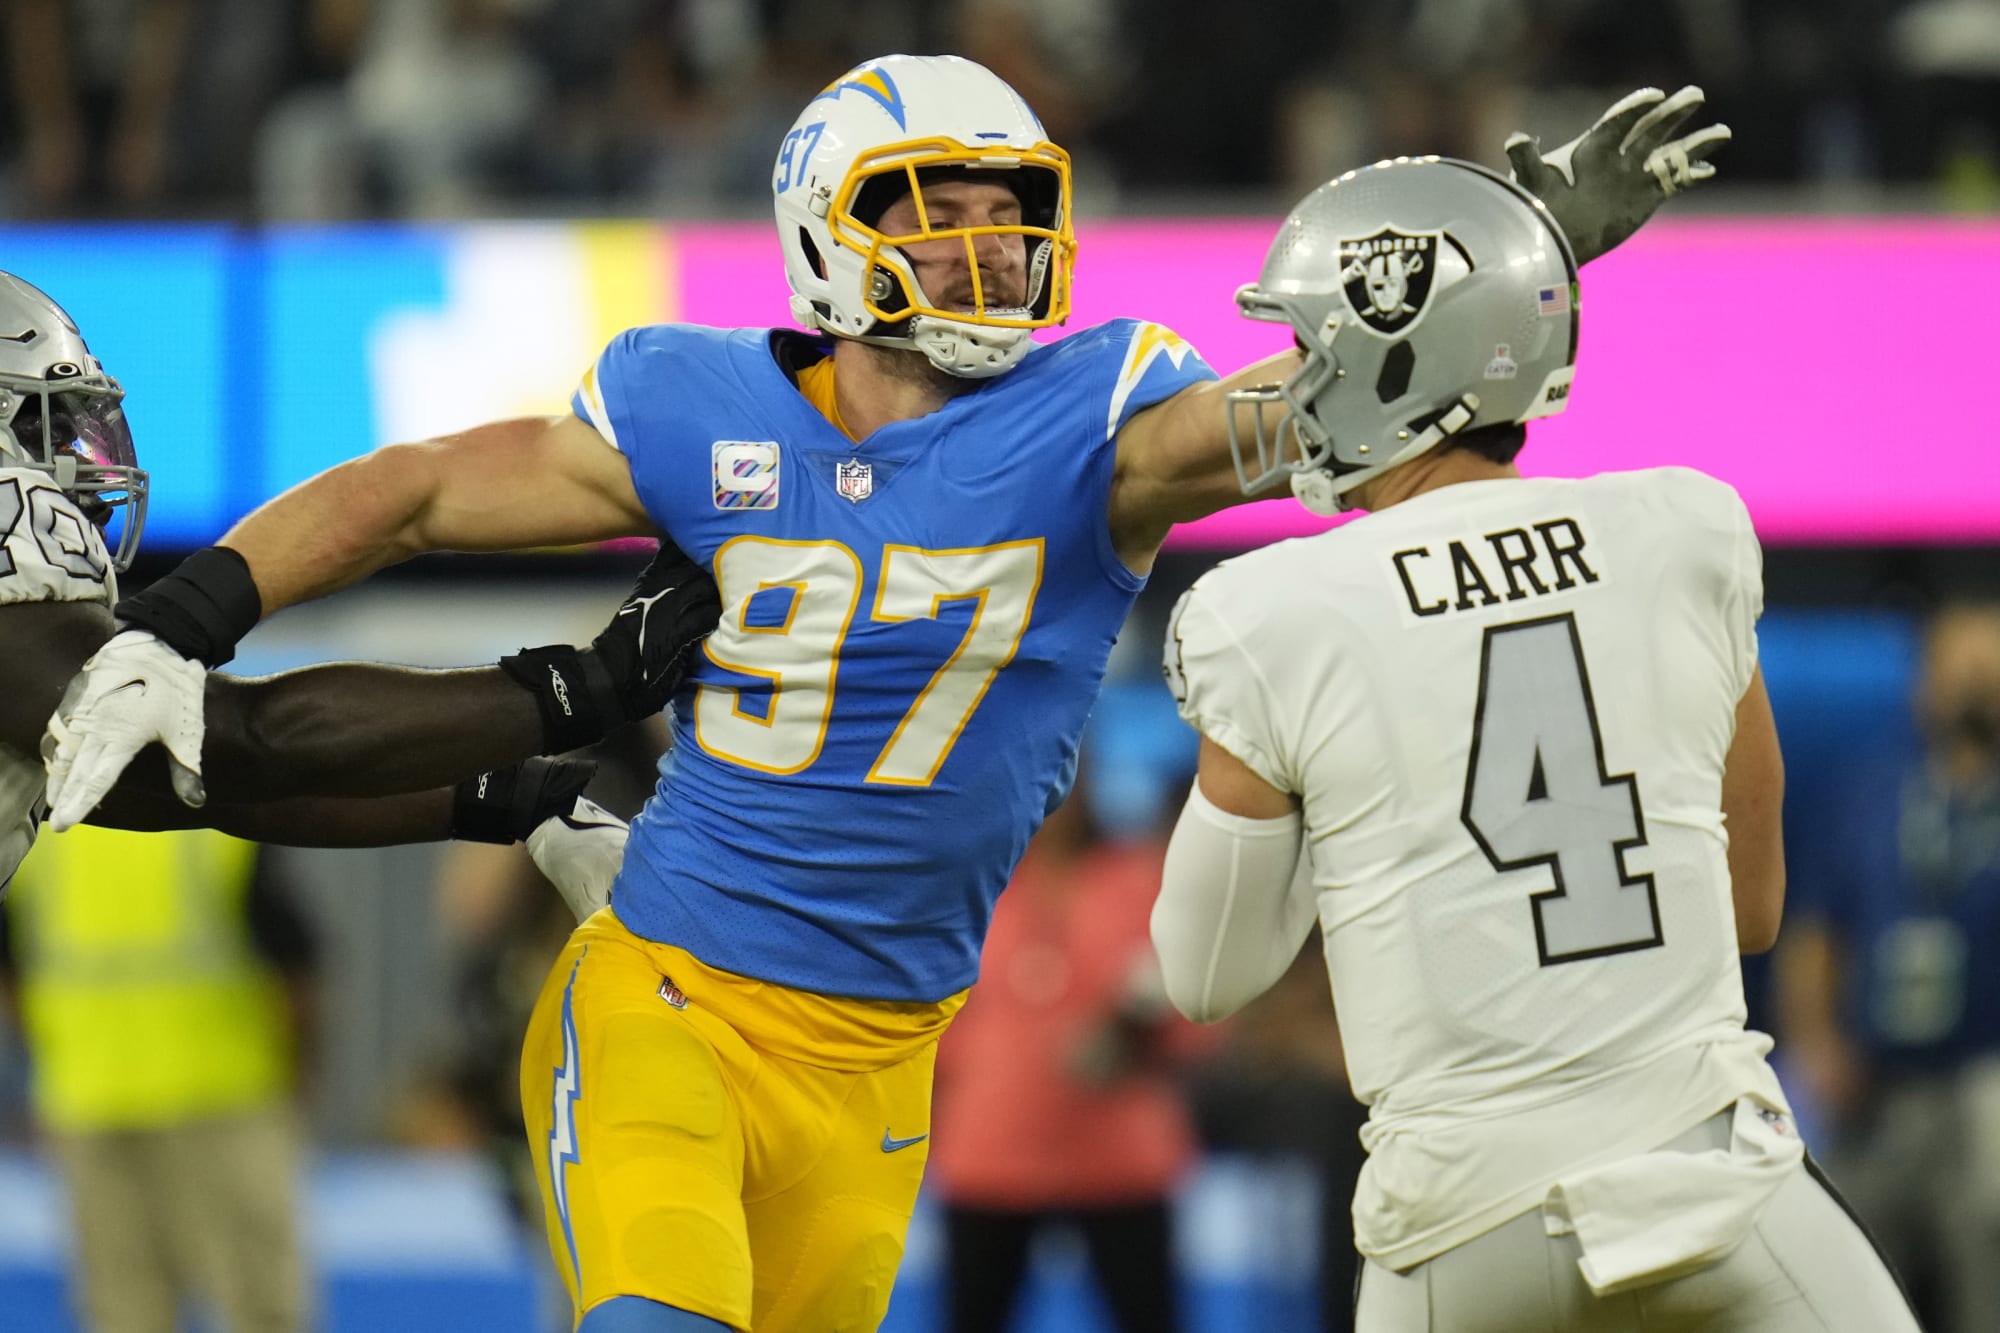 Raiders can make a real statement in Week 1 against the Chargers